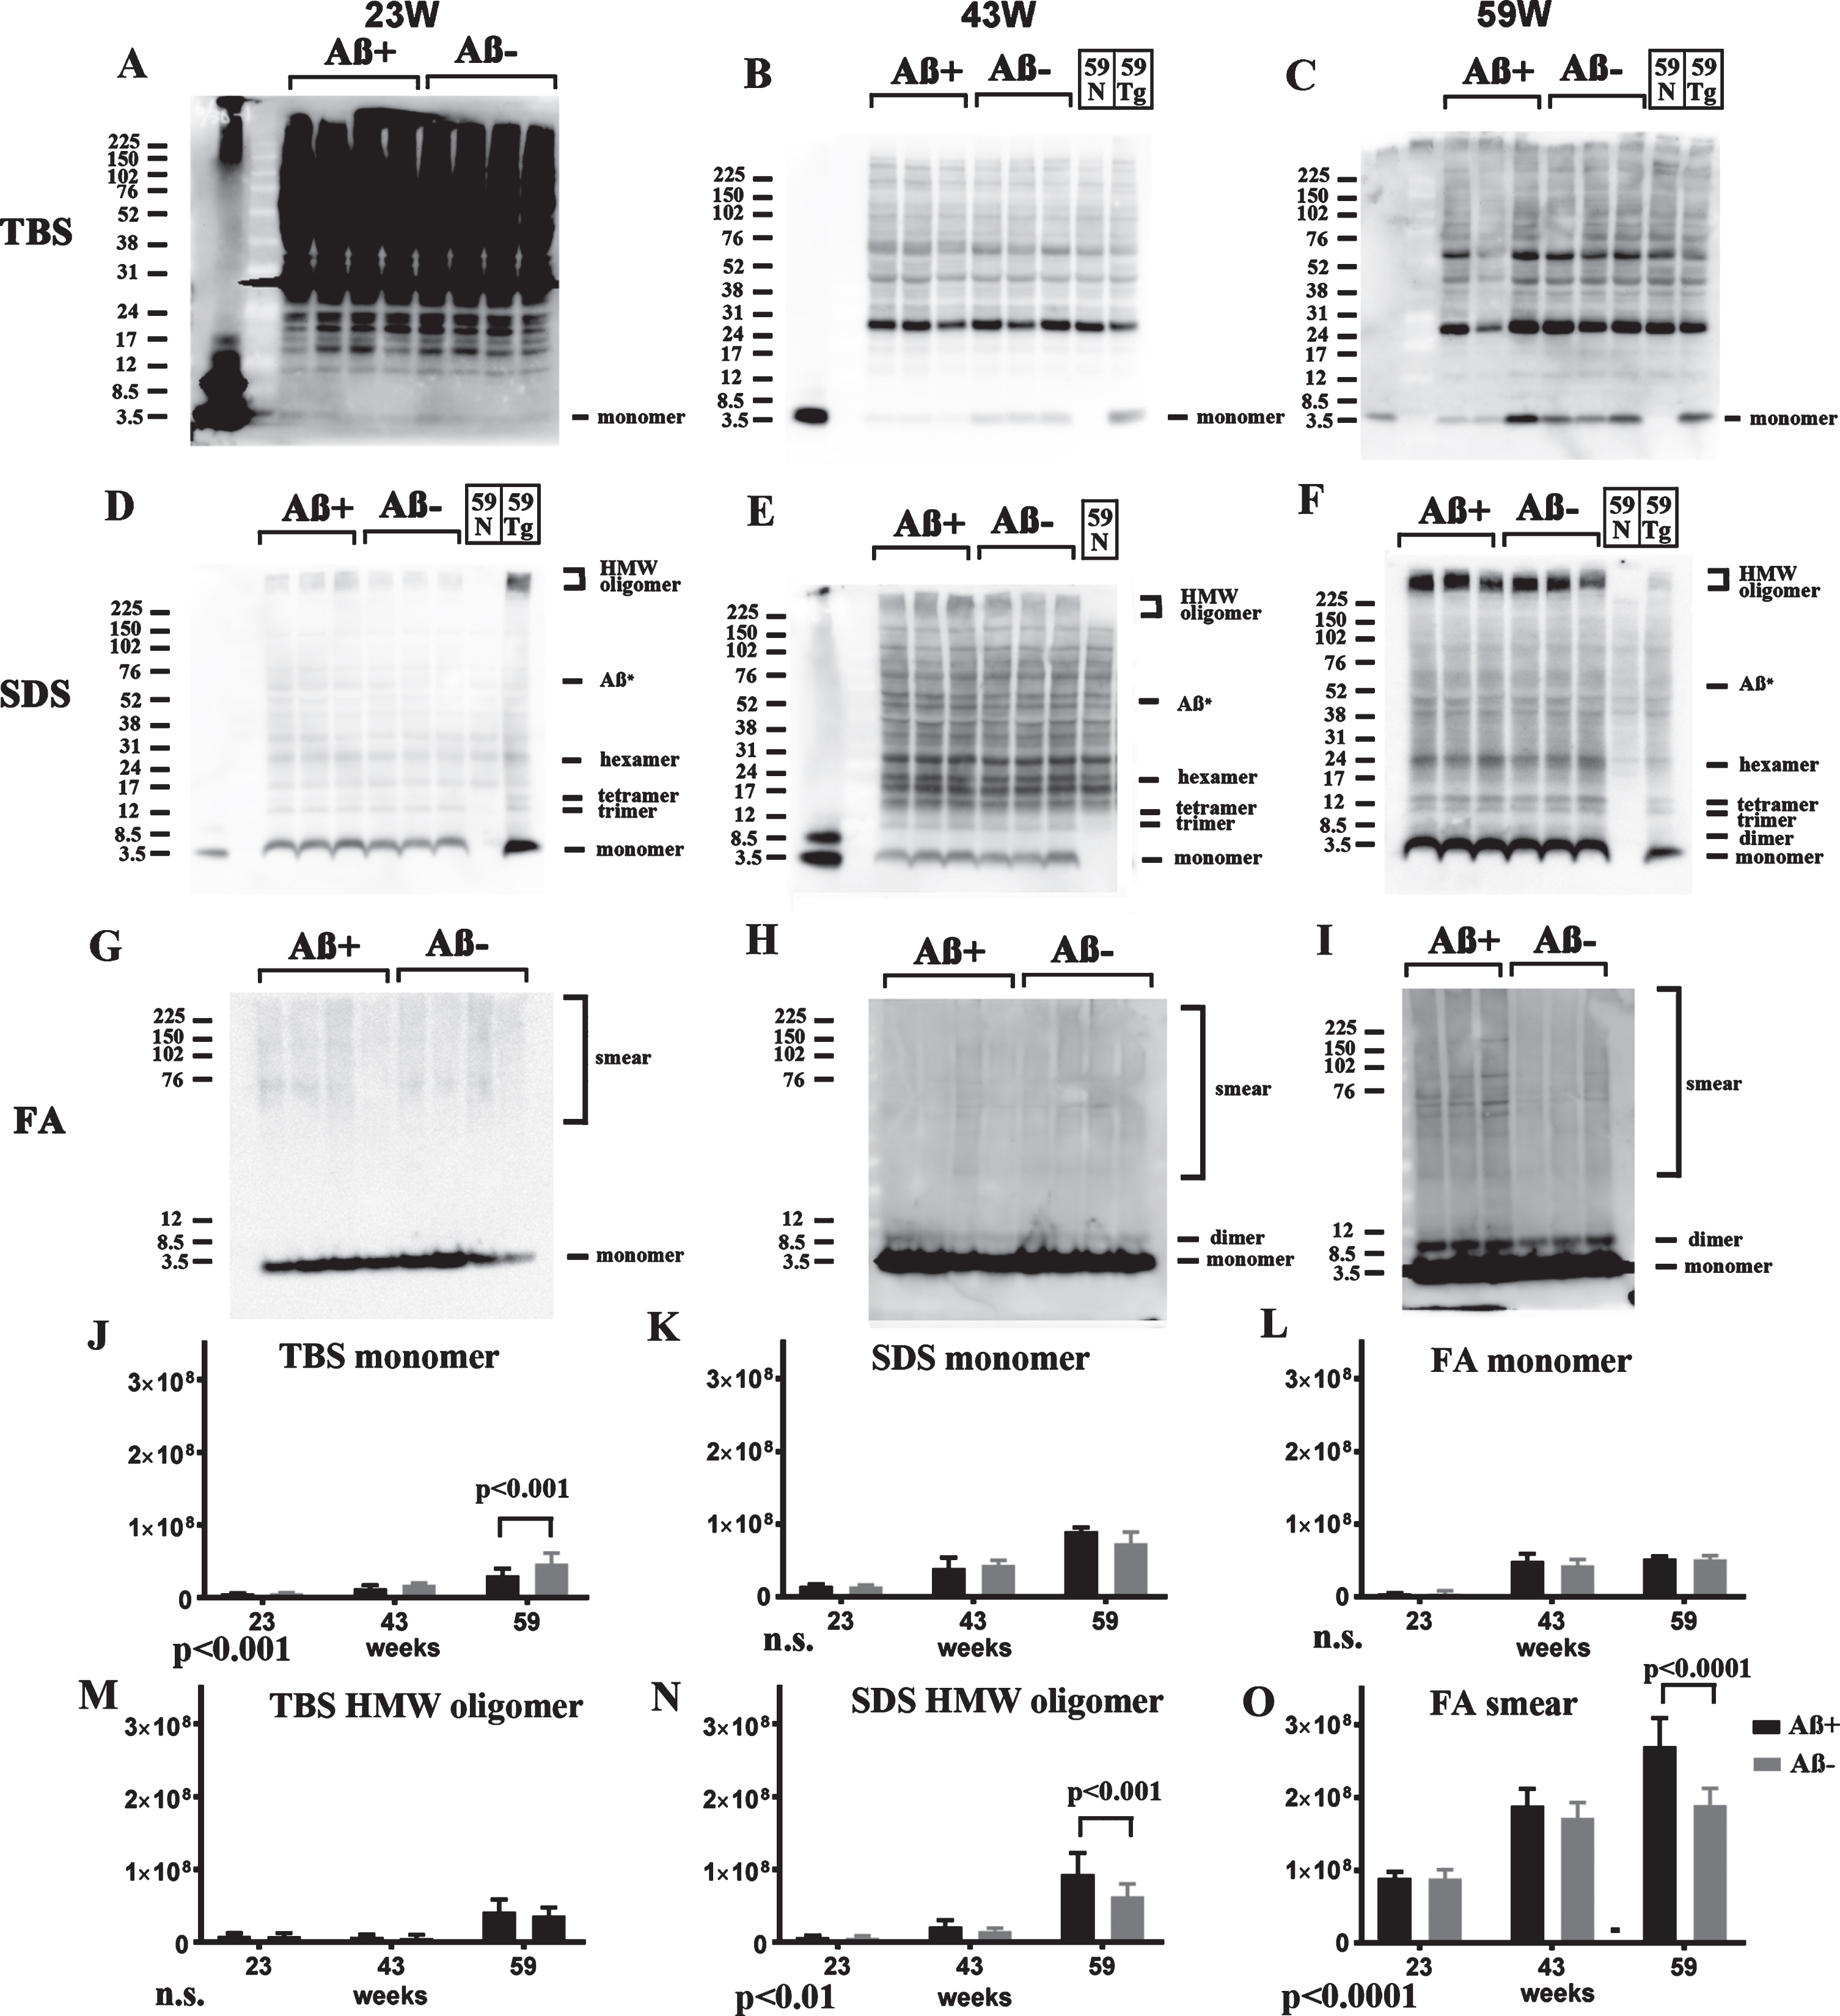 Longitudinal comparison of Aβ species (23, 43, and 59 weeks) in TBS (A–C), SDS (D–F), and FA (G–I) extracts from Aβ+ and Aβ– treated mice in western blots using 82E1. For controls, a nontransgenic mouse at 59 weeks (59N) and a TgCRND8 mouse at 59 weeks without treatment (59Tg) were used. Aβ monomer in each fraction (J–L), HMW oligomers in the TBS fraction (M), and SDS fraction (N), and Aβ smear in the FA fraction (O) were quantified. The results of two-way ANOVA are shown in the lower left of each figure (J–O). In TBS fractions, soluble Aβ monomers in Aβ+ treated mice were decreased compared with those in Aβ– treated mice at 23, 43, and 59 weeks (A–C, J). To detect Aβ monomers clearly at 23 weeks, the membrane was exposed for longer than the other blots (A). Small amounts of HMW AβOs were detected only at 59 weeks, but they did not differ between the Aβ+ and Aβ– groups (A–C, M). In SDS fractions, Aβ monomers and LMW AβOs were detected equally at 23, 43, and 59 weeks (D–F, K). Accumulation of HMW AβOs was inversely increased in the Aβ+ treated group at 23, 43, and 59 weeks (D–F, N). In FA fractions, monomers and dimers of Aβ increased with age equally in both groups (G–I, L). However, smear patterns of Aβ were markedly visualized in the Aβ+ group at 59 weeks (G–I, O). Mice at 23 weeks (n = 9 for Aβ+, n = 11 for Aβ–), 43 weeks (n = 7 for Aβ+, n = 6 for Aβ–), and 59 weeks (n = 6 for Aβ+, n = 7 for Aβ–) were used.